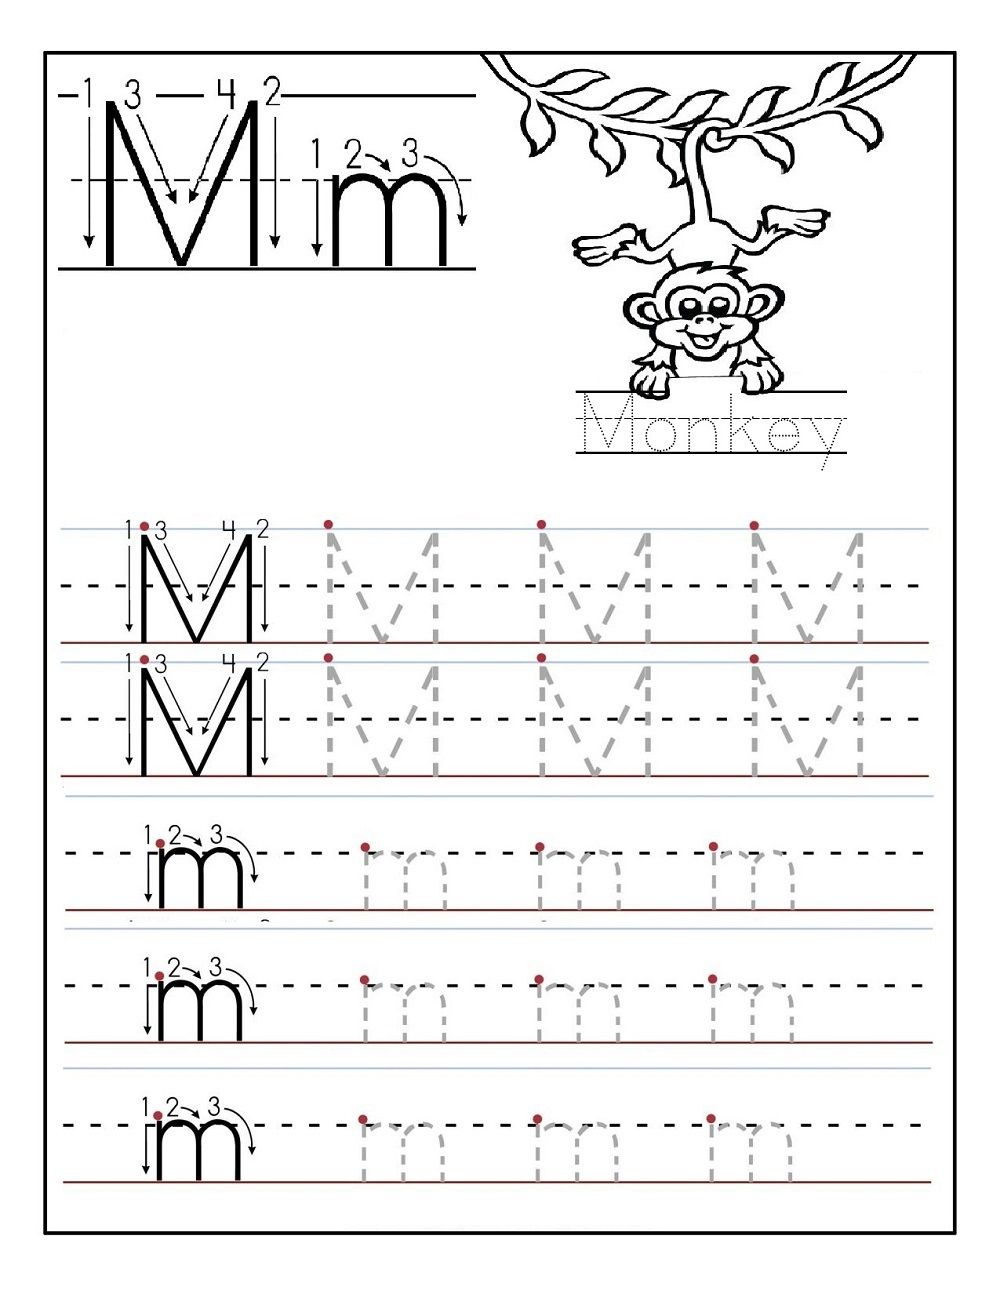 Tracing Letters Worksheets For Practice In 2020 (With Images